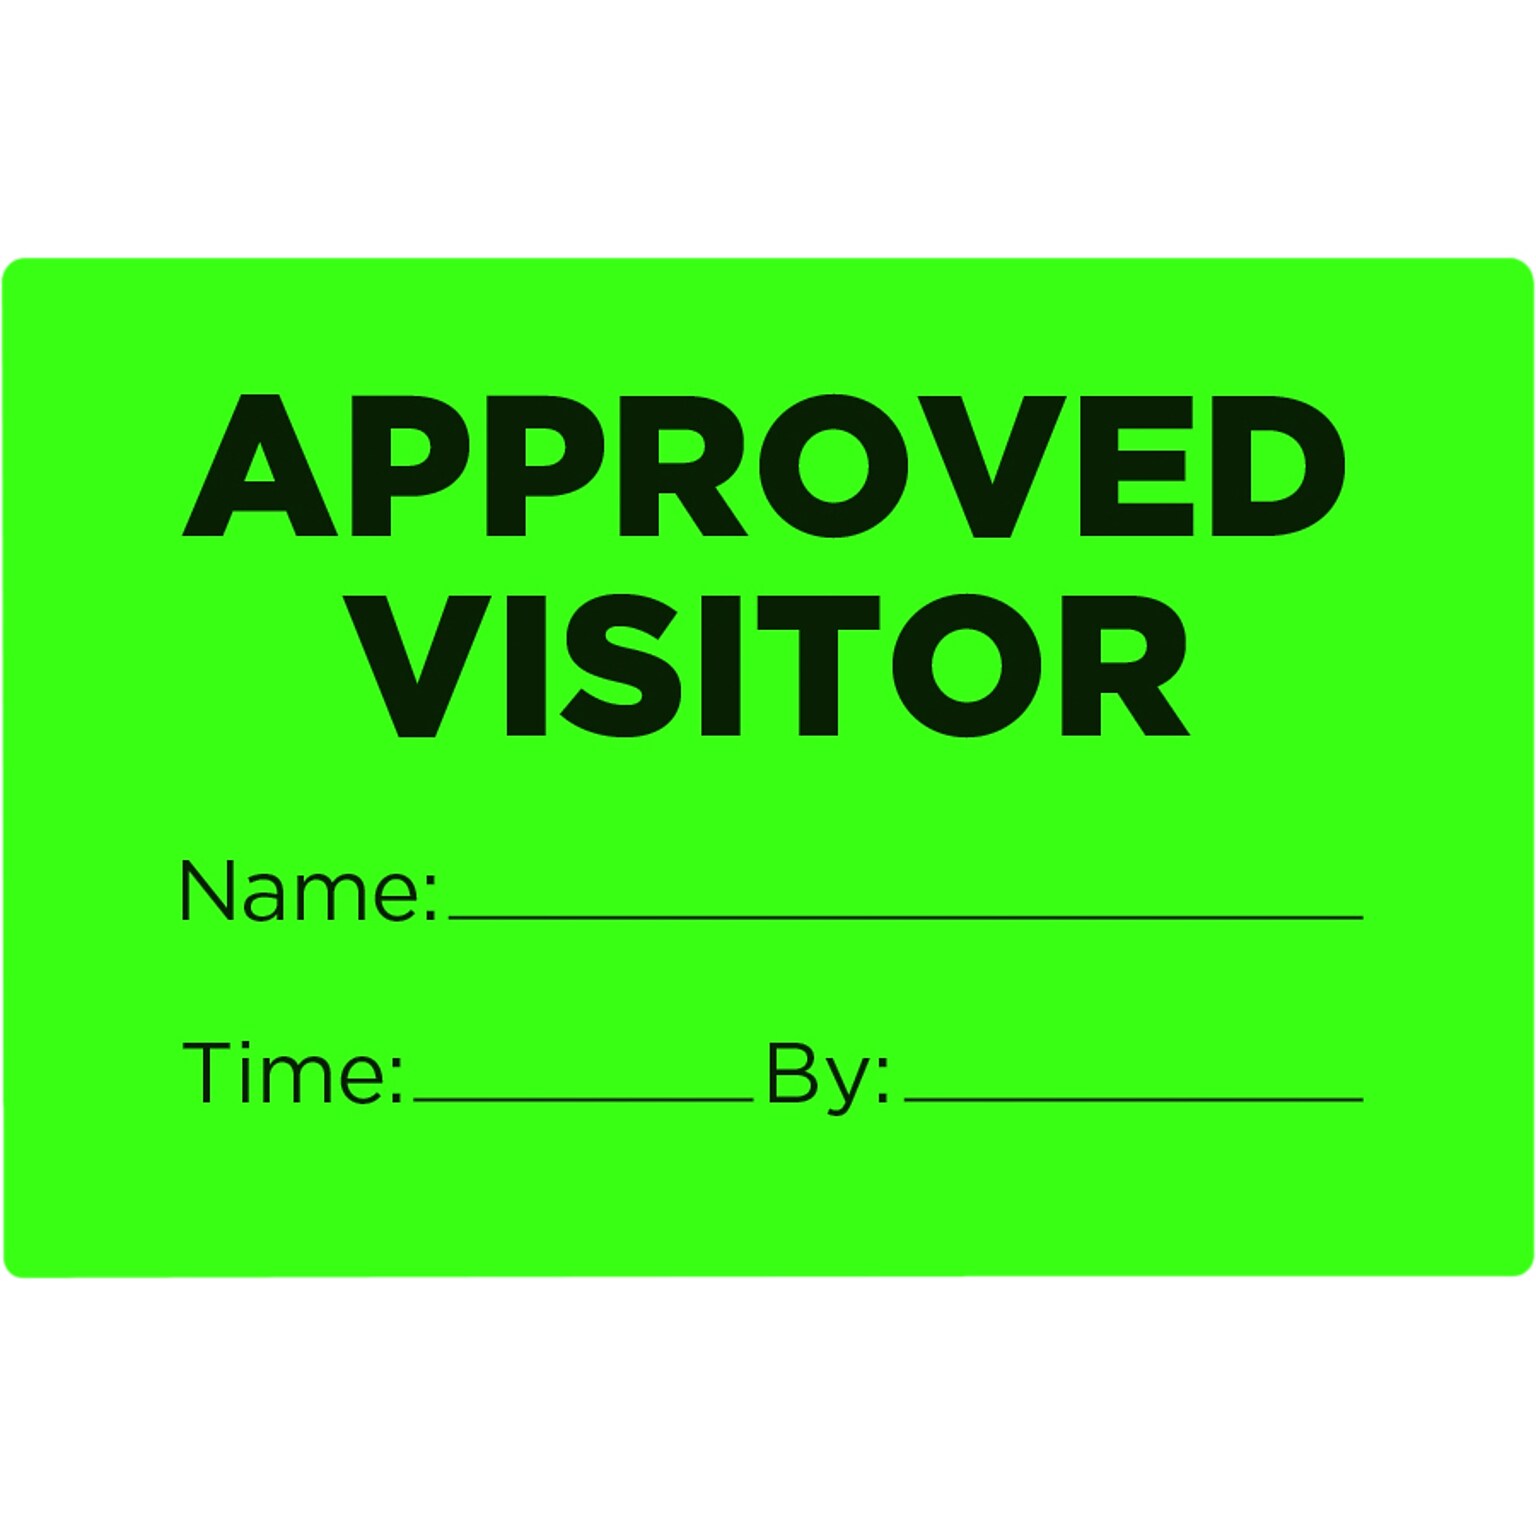 Cosco Paper APPROVED VISITOR Safety Label, 2 x 3, Fluorescent Green, 100/Pack (098458PK100)